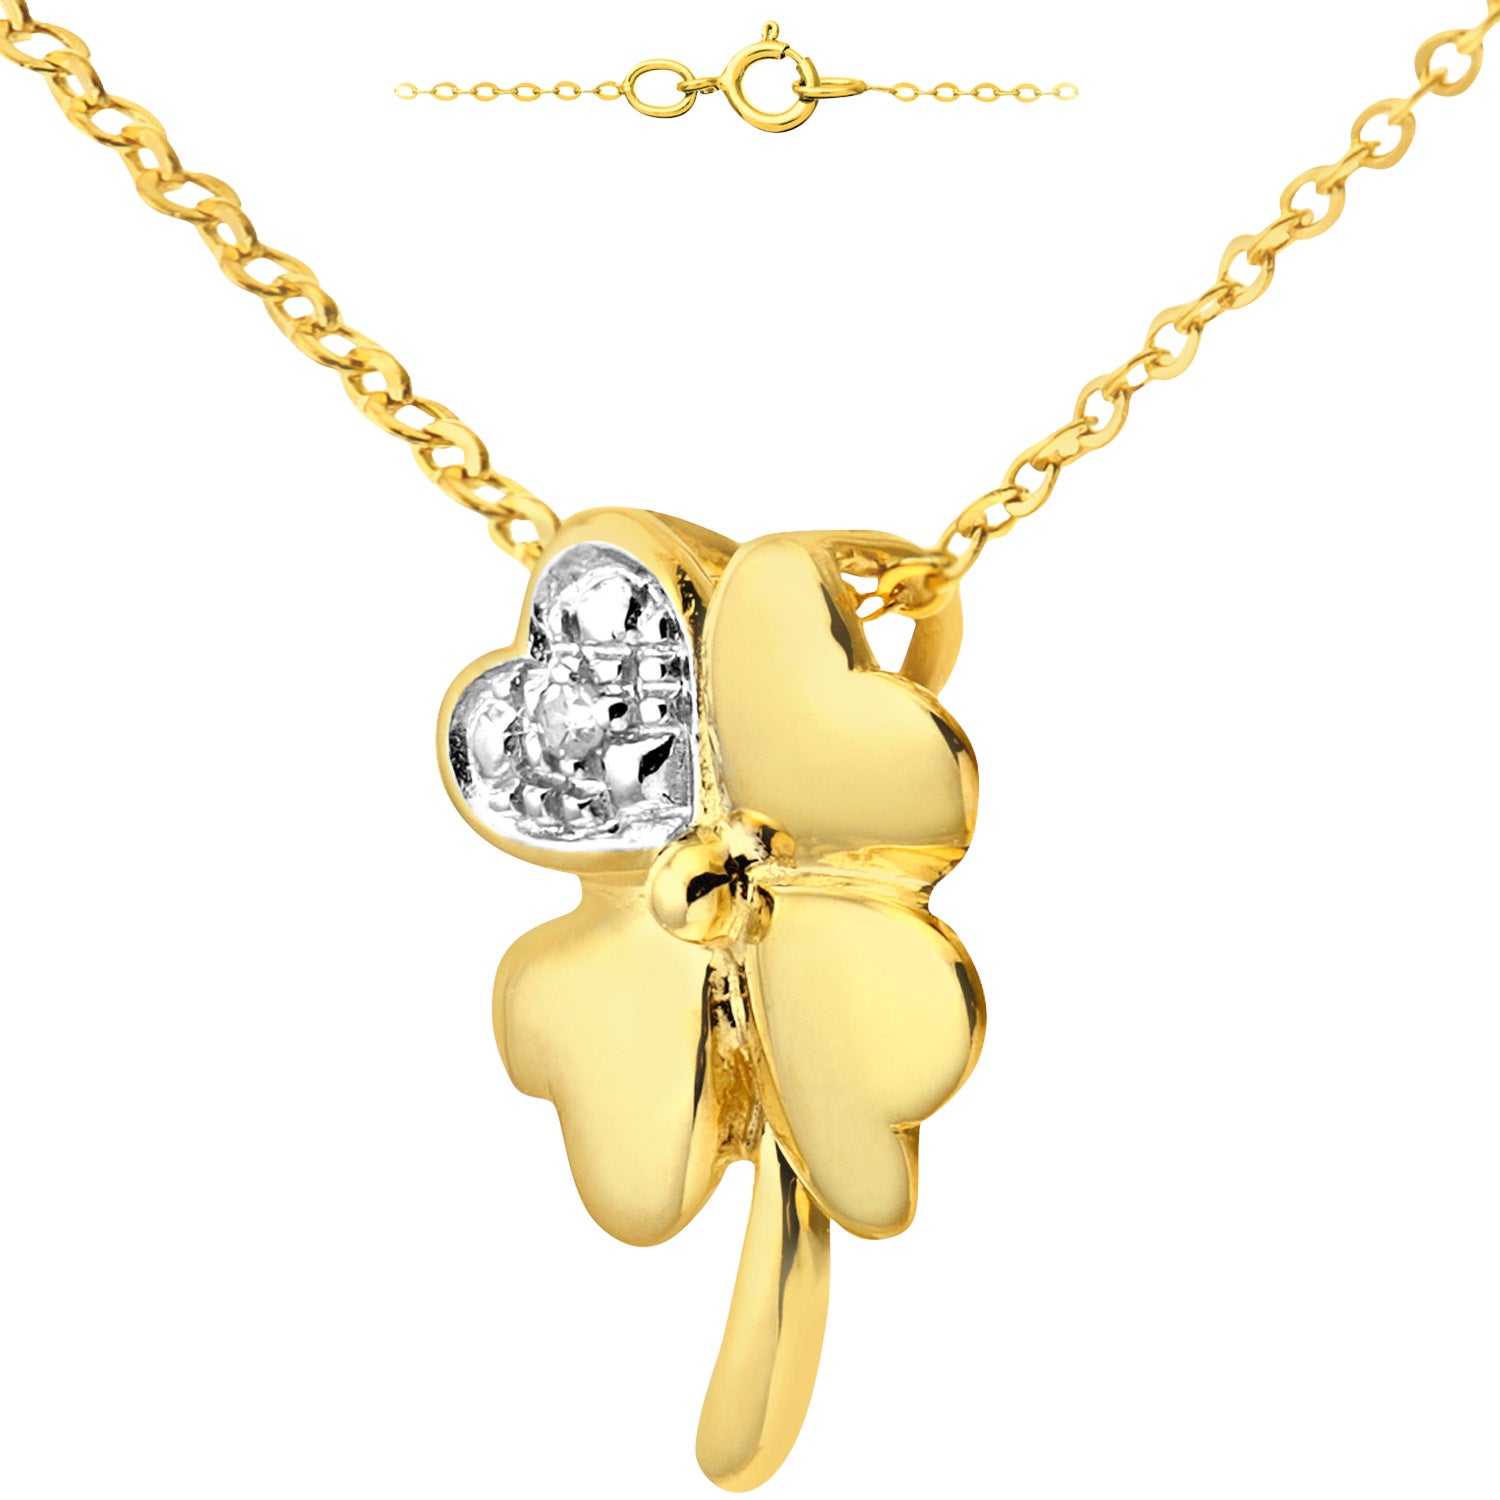 9ct Gold  0.5pts Diamond Heart 4 Leaf Clover Charm Necklace 18" - PP0AXL4736Y